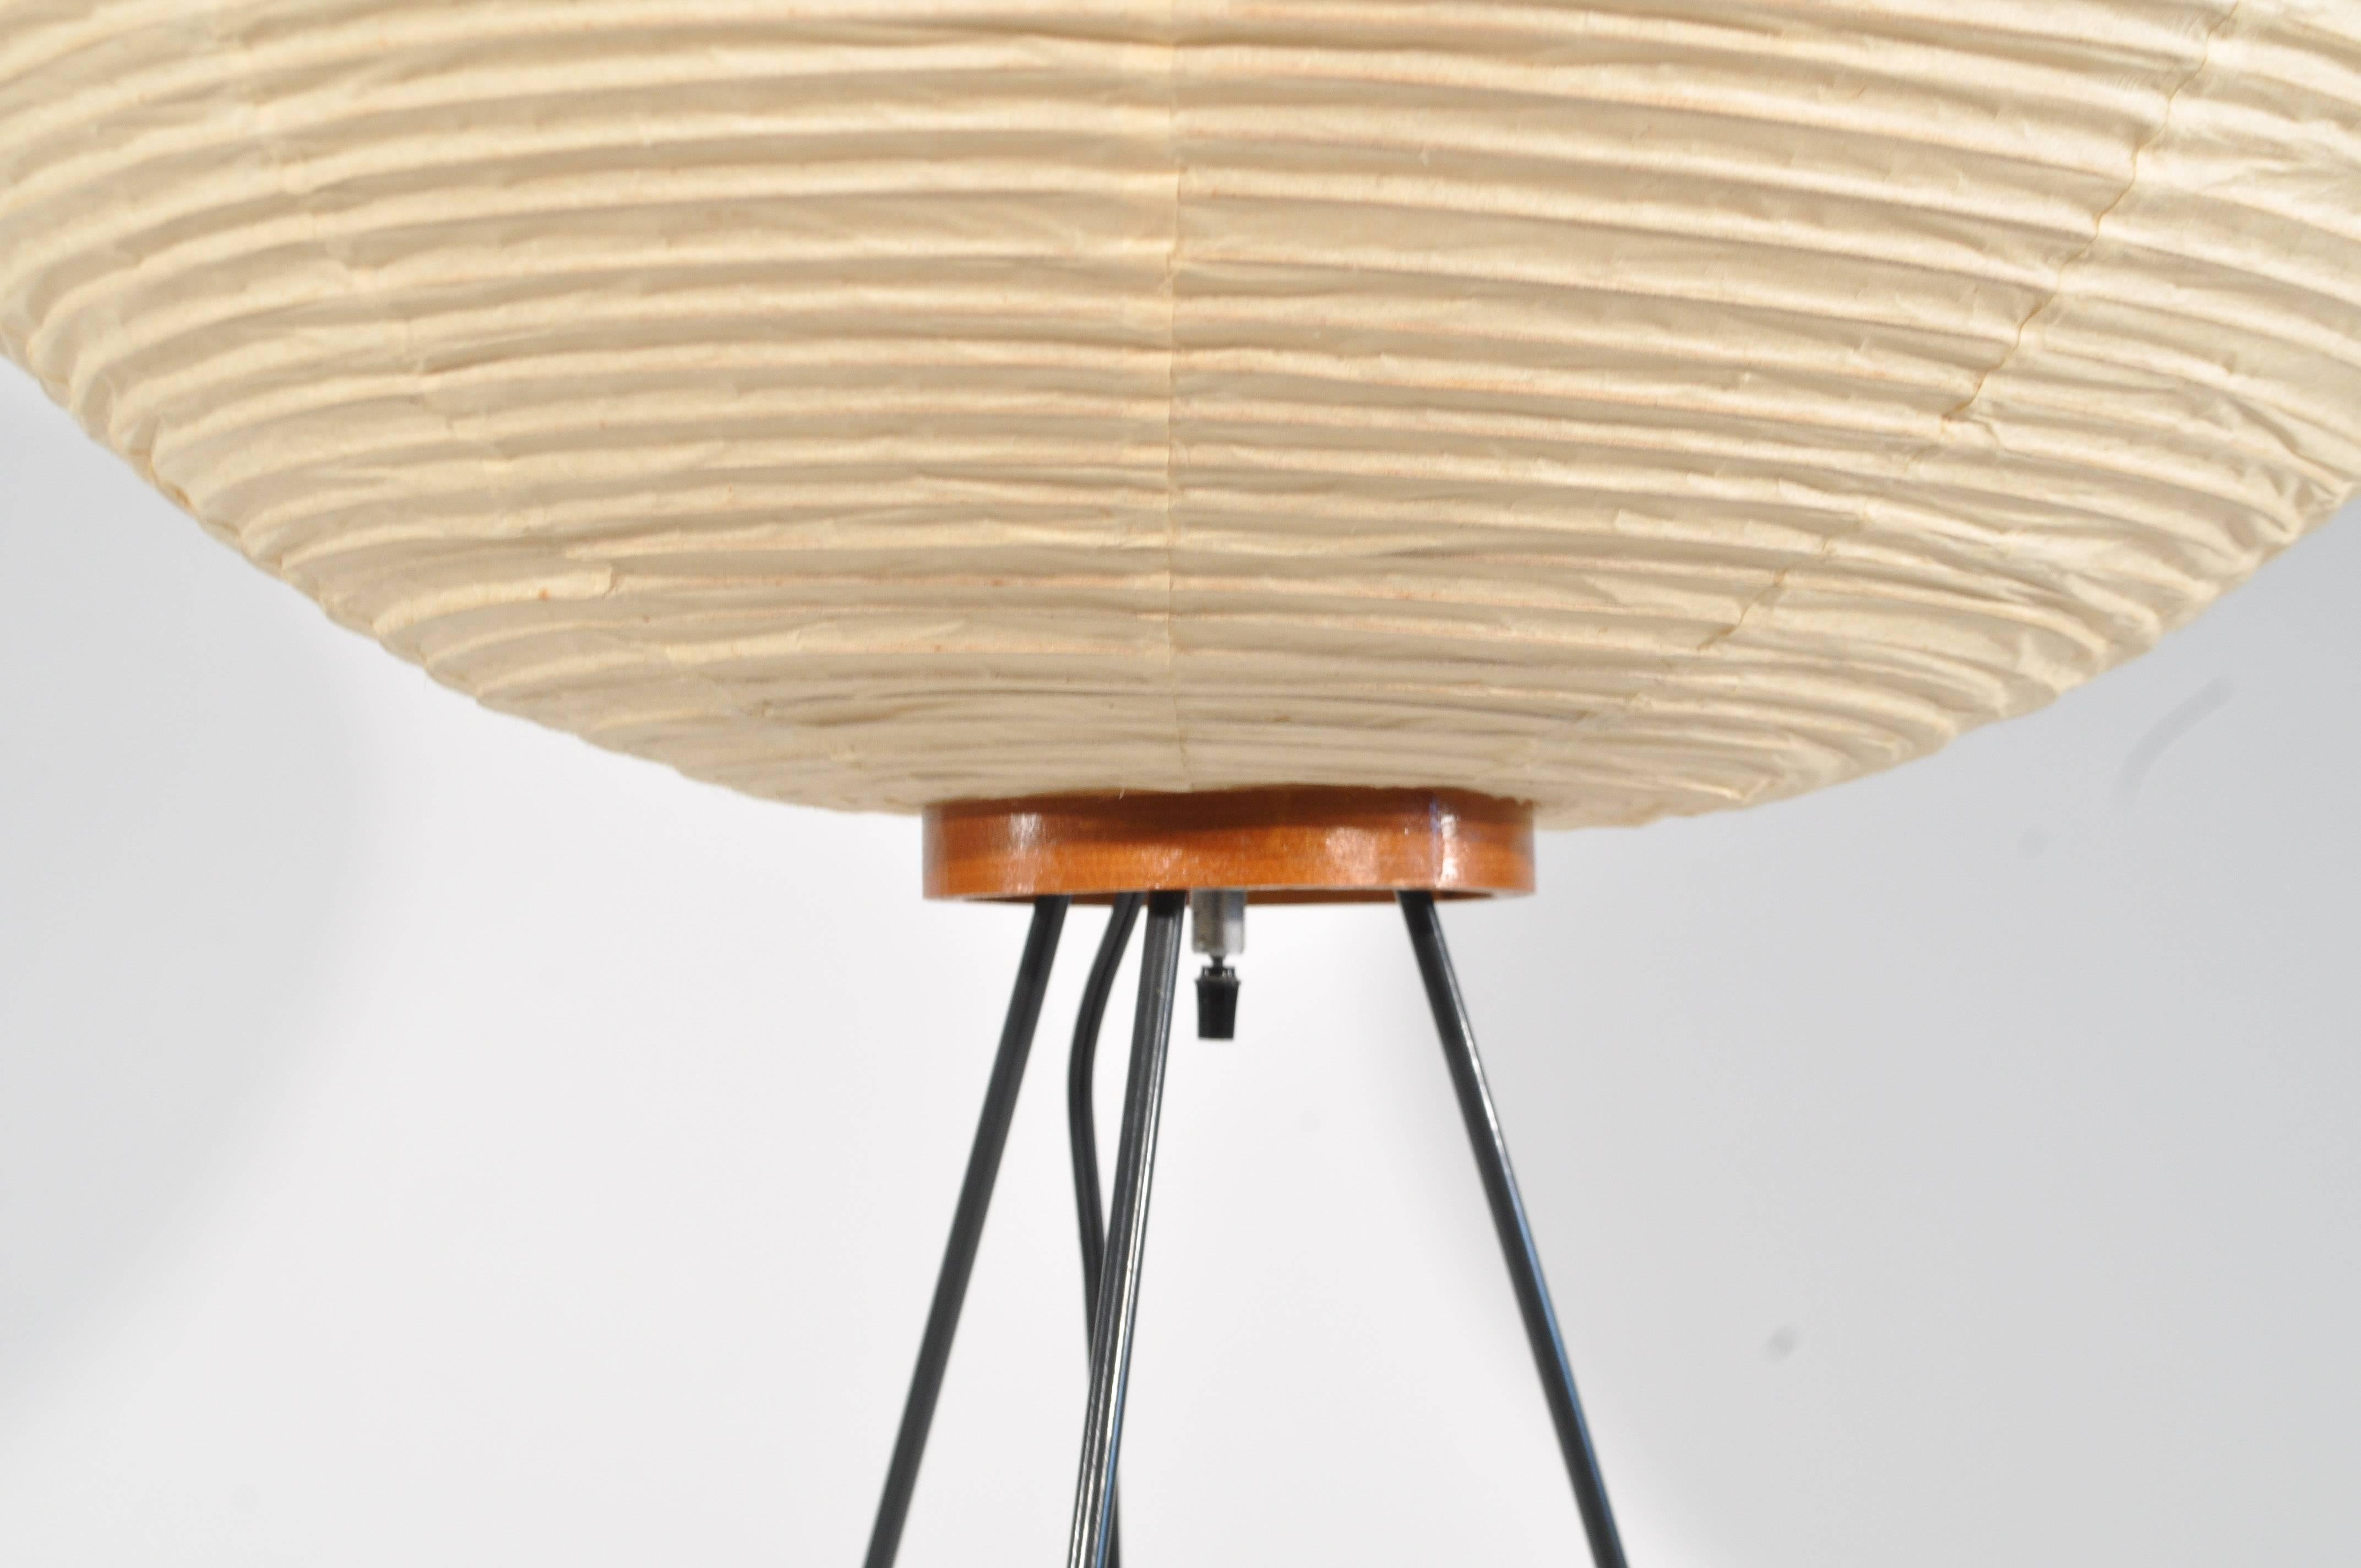 An early piece in the organic style that Noguchi was best known for. This lamp is from the 1960s, featuring a suspended paper shade on tripod base. Model 3A, with the Noguchi and Akari stamp.

Dimensions: Height 39